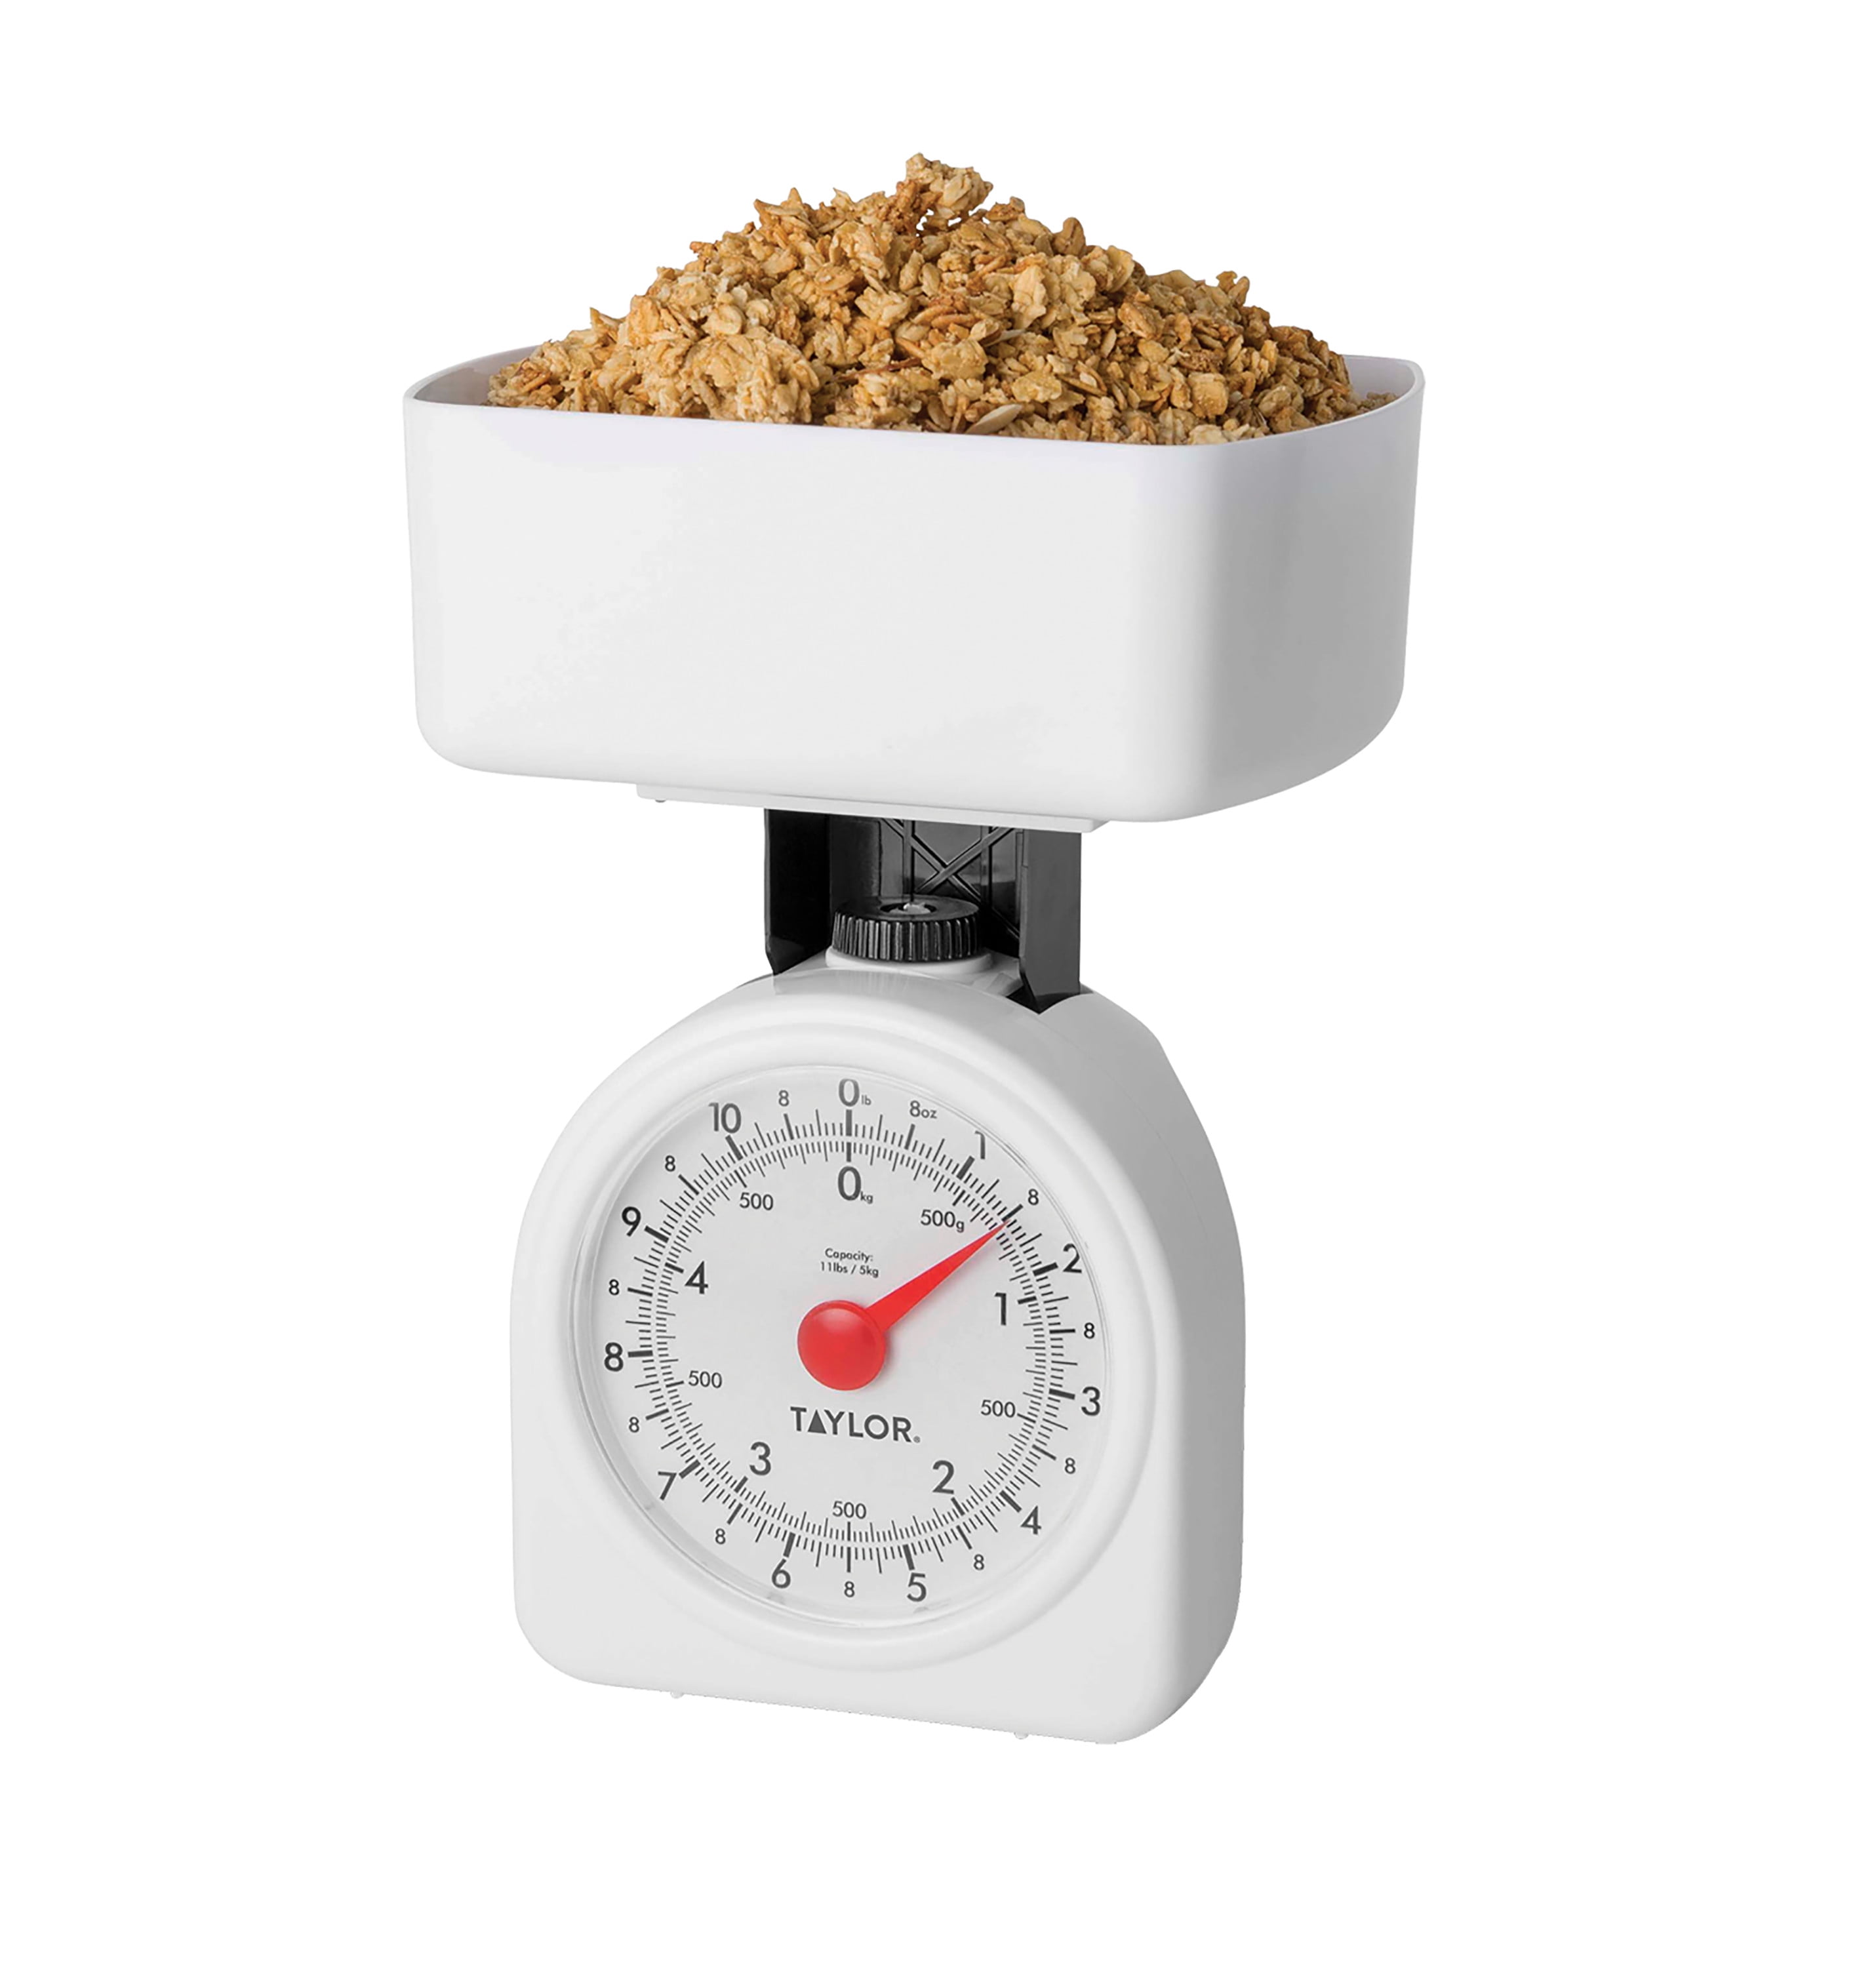 Taylor Compact Mechanical Portion Control Food Scales